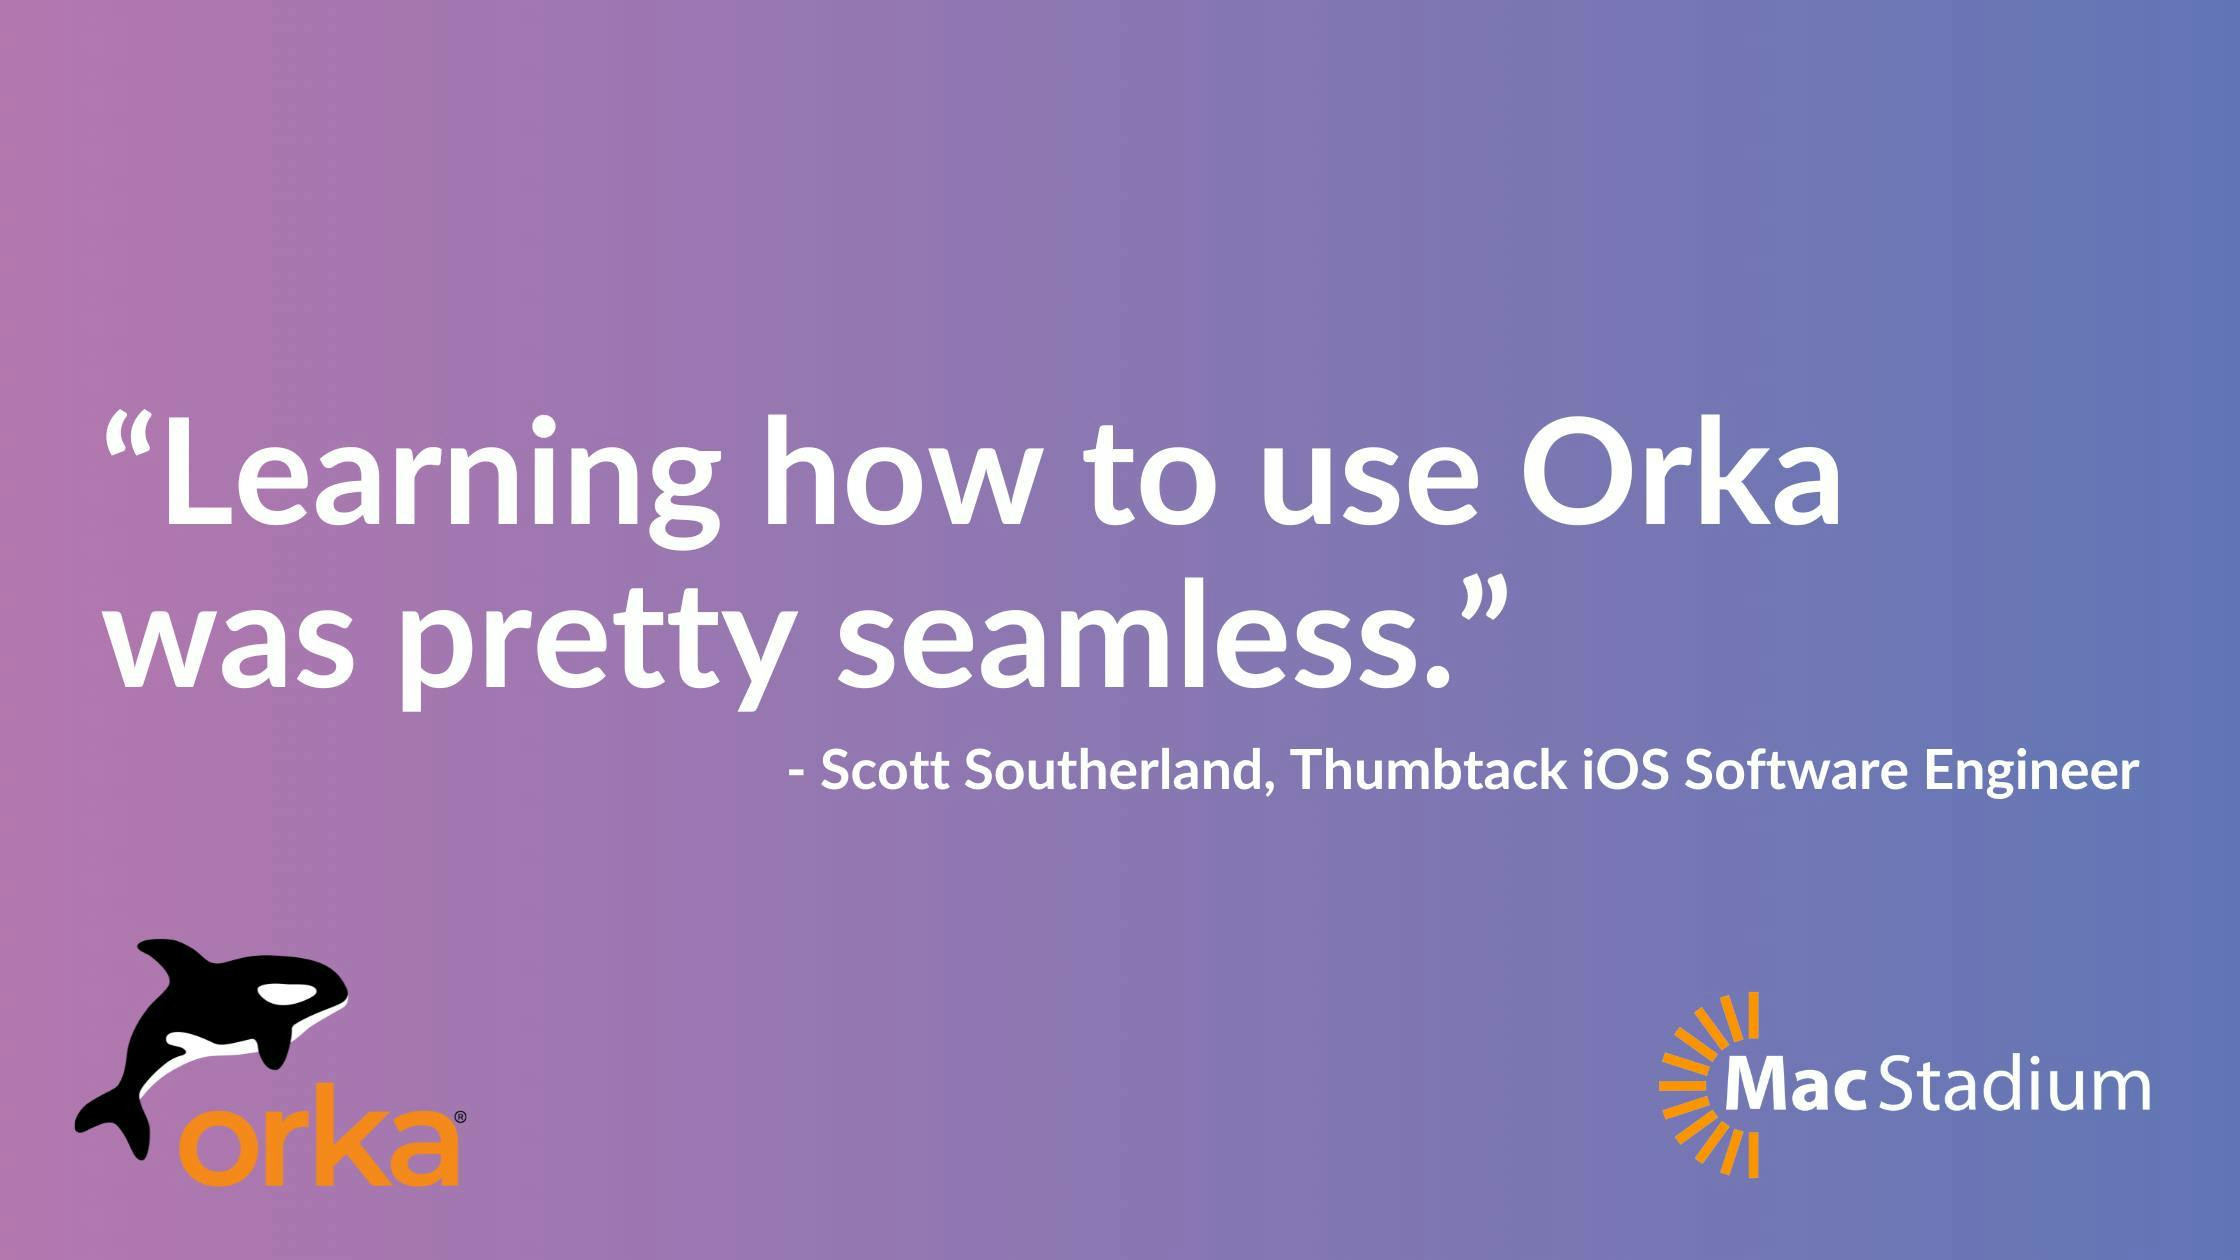 Orka quote from Thumbtack